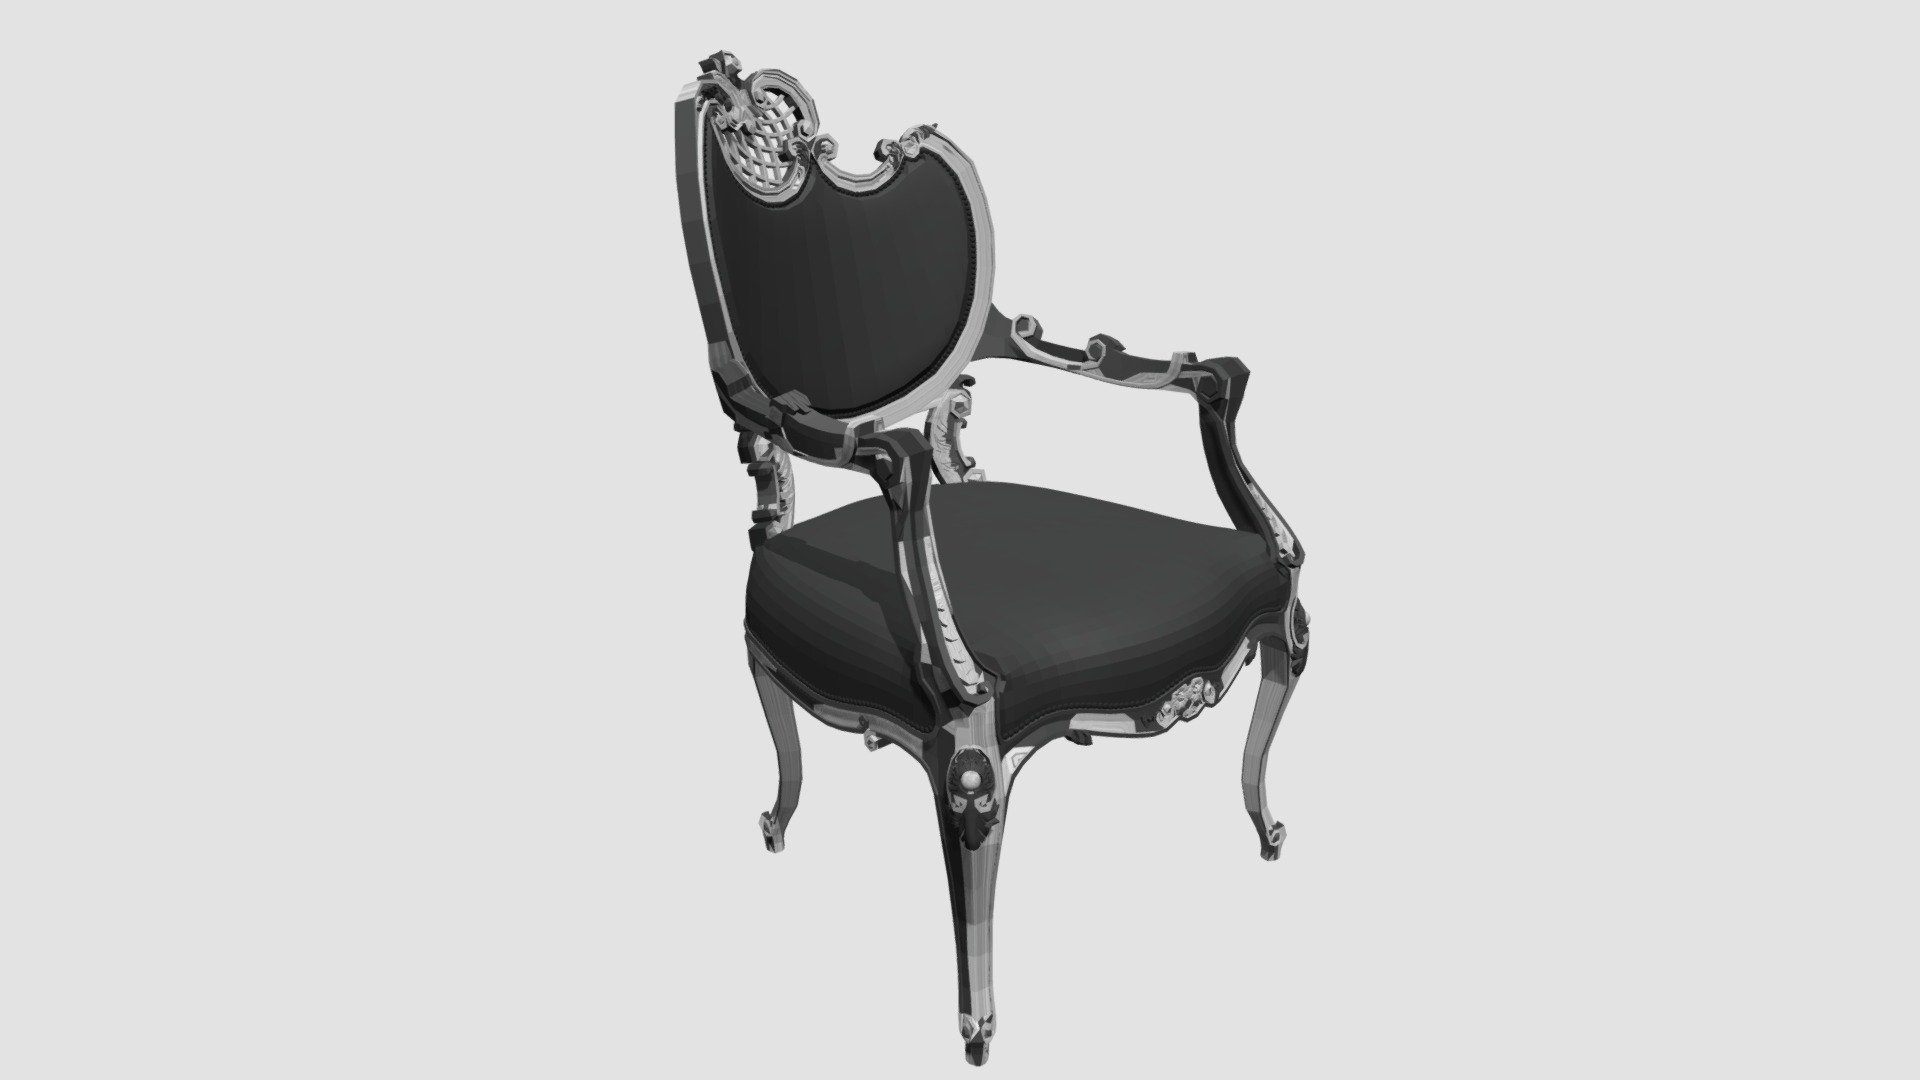 Highly detailed 3d model of antique furniture with all textures, shaders and materials. It is ready to use, just put it into your scene 3d model